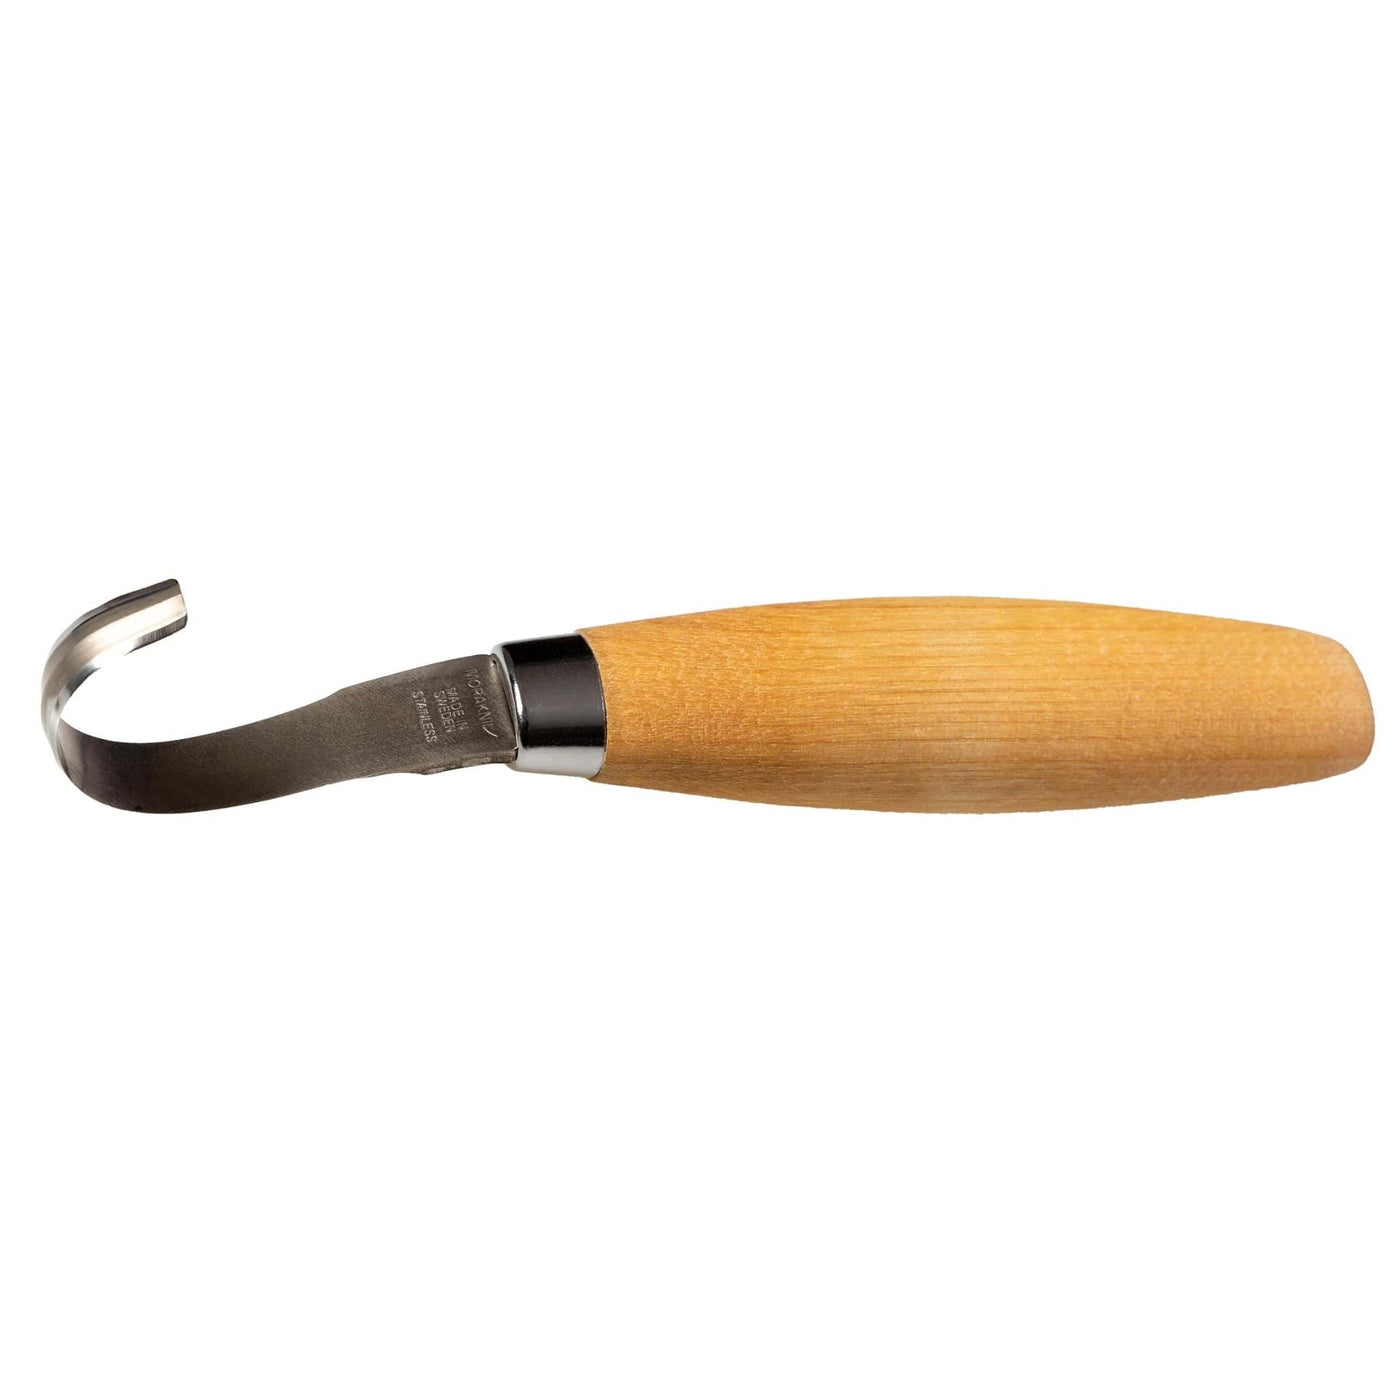 Morakniv 162 Woodcarving Hook Two-Sided Wood Carving Knife | Further Faster Christchurch NZ